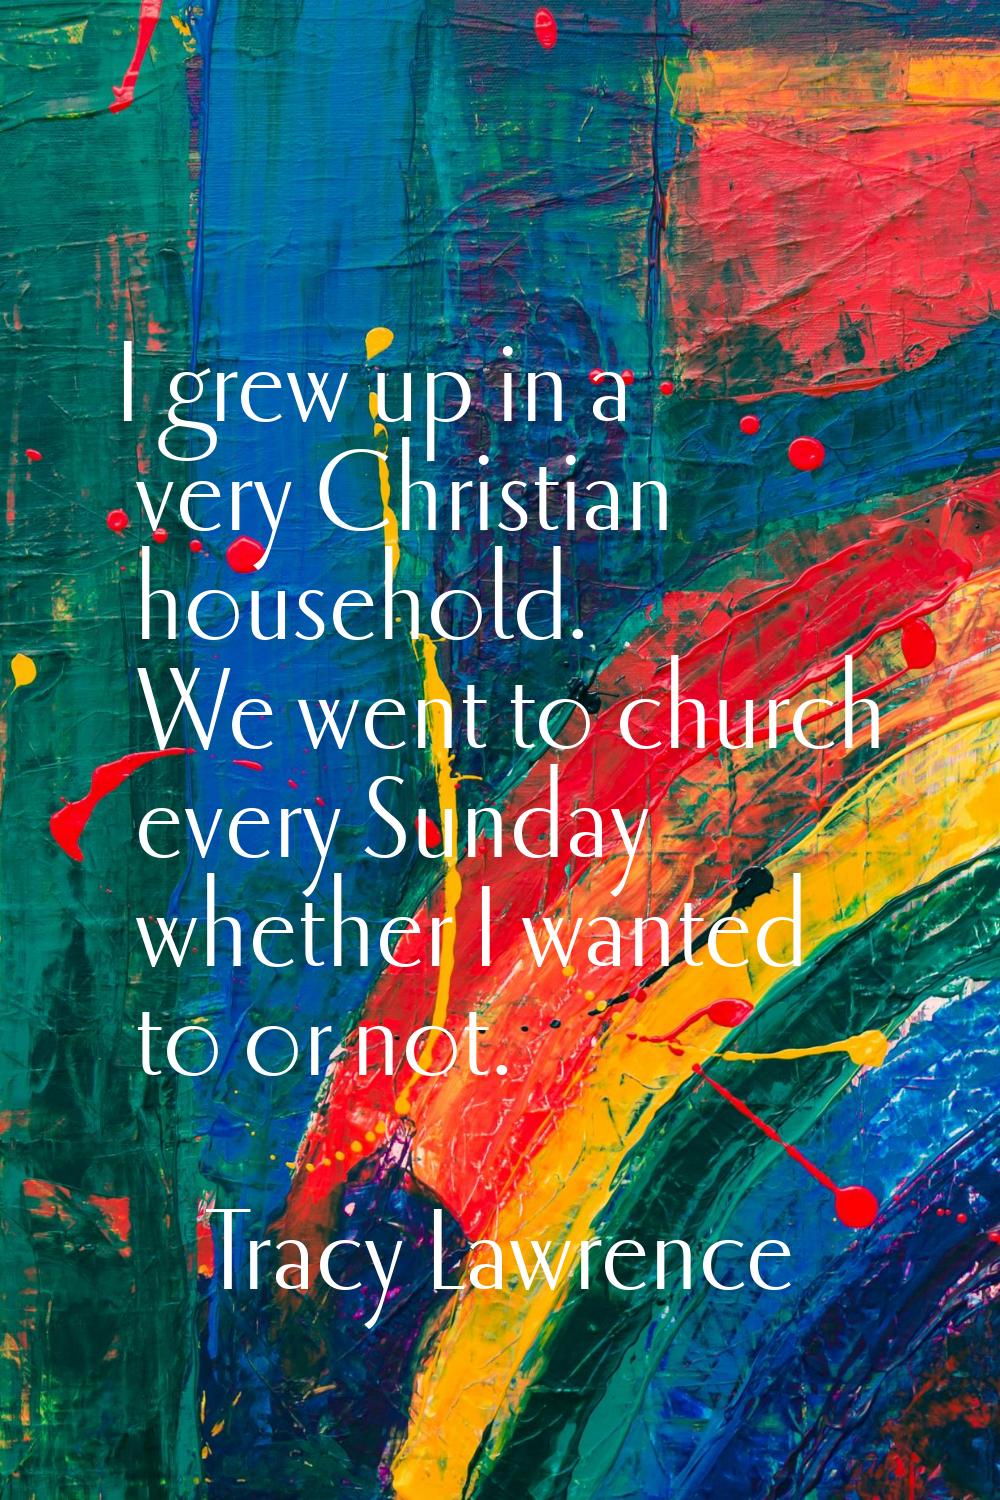 I grew up in a very Christian household. We went to church every Sunday whether I wanted to or not.